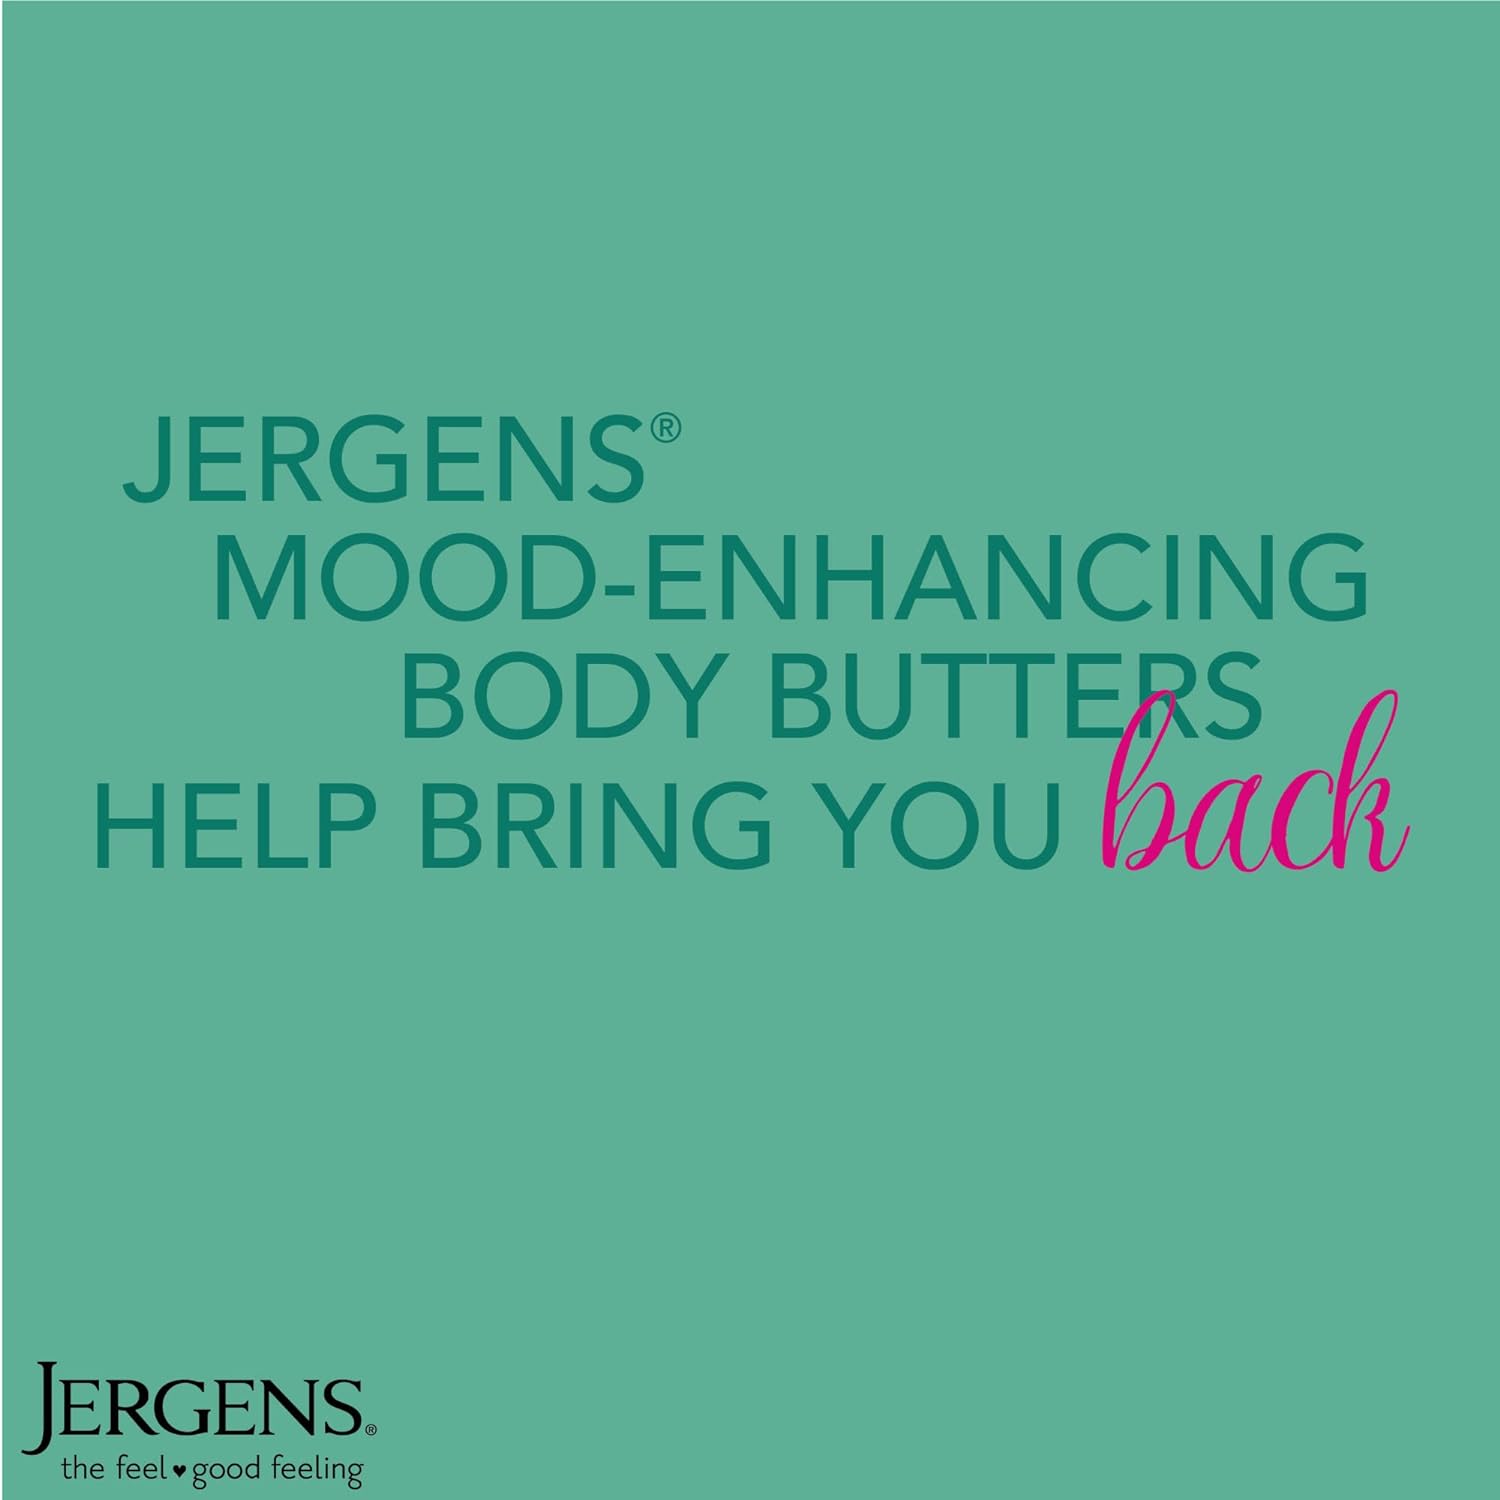 Jergens Body Butter Moisturizers, 7 fl oz 2PK, with Energizing Citrus and Calming Lavender, Softens and Soothes Dry Skin : Beauty & Personal Care